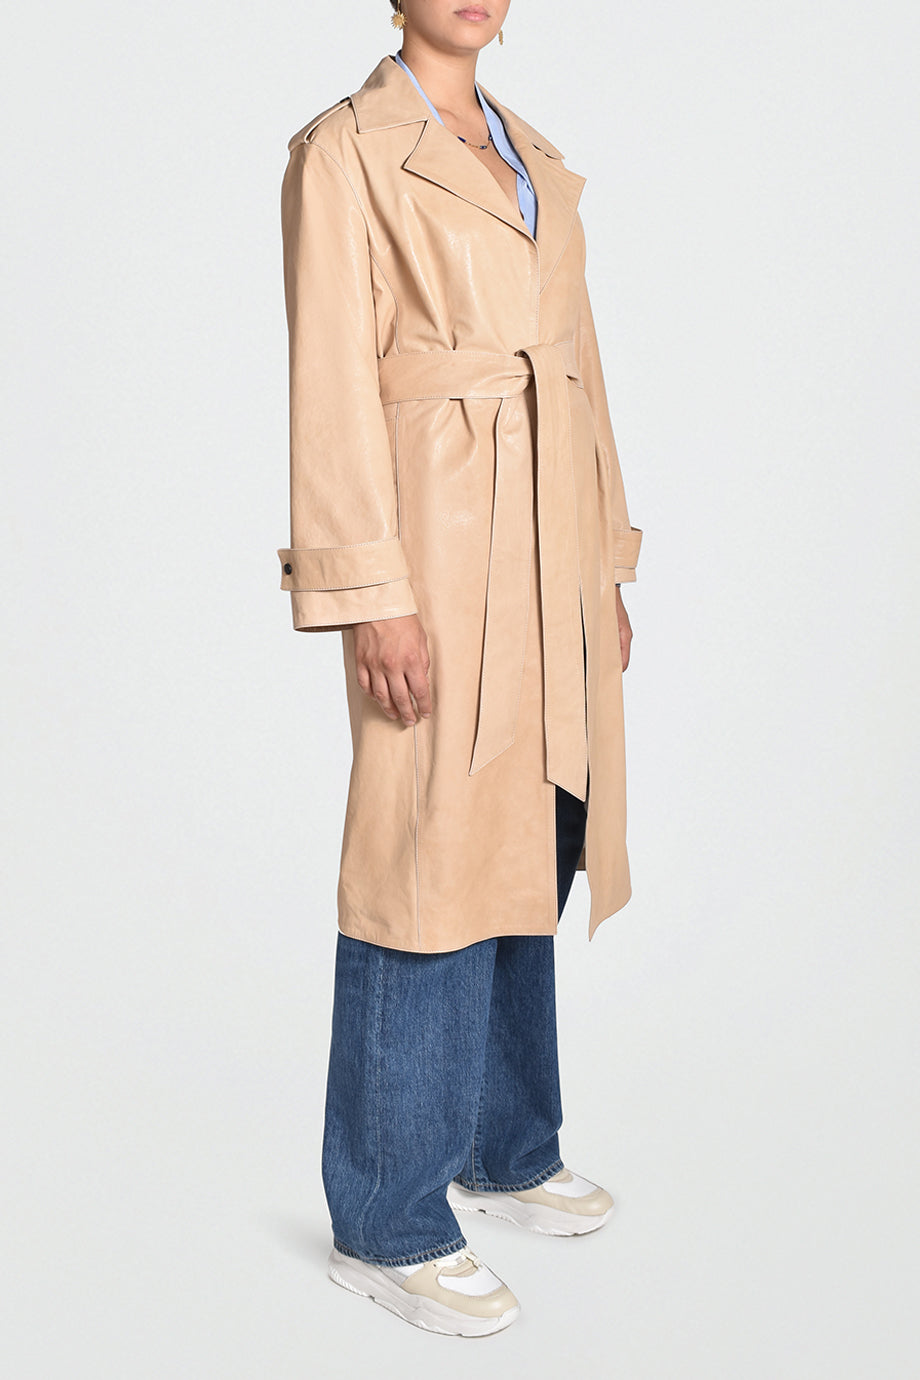 Husk REVIVAL TRENCH - Taupe